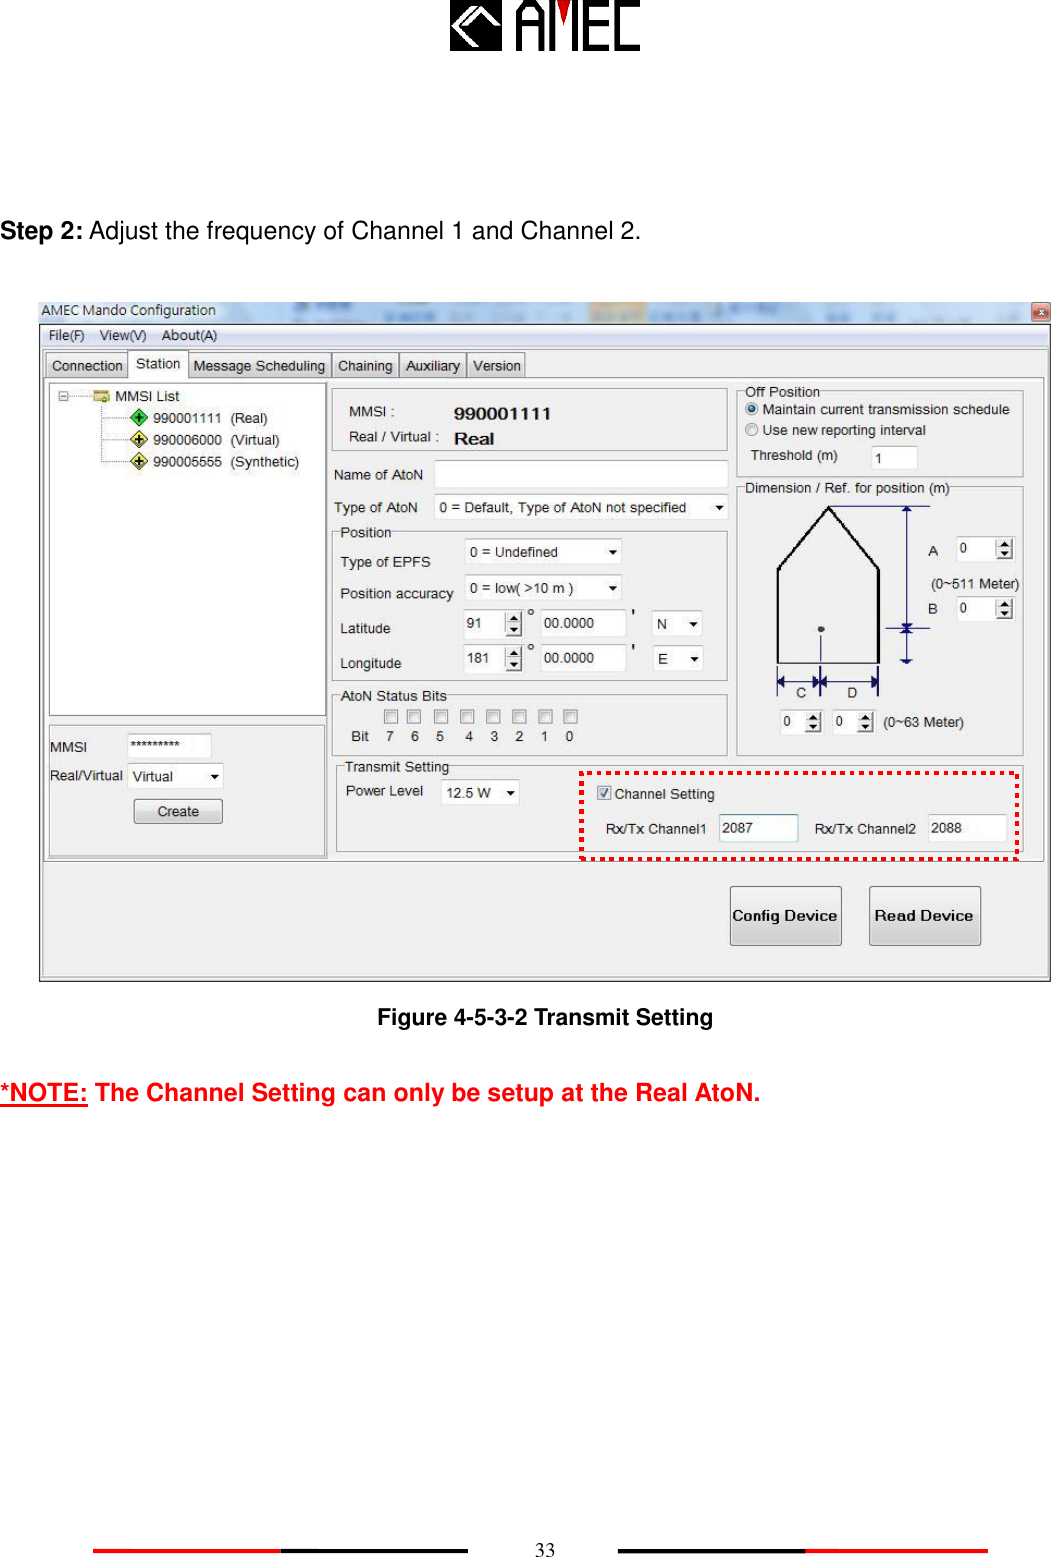    33    Step 2: Adjust the frequency of Channel 1 and Channel 2.   Figure 4-5-3-2 Transmit Setting  *NOTE: The Channel Setting can only be setup at the Real AtoN.  